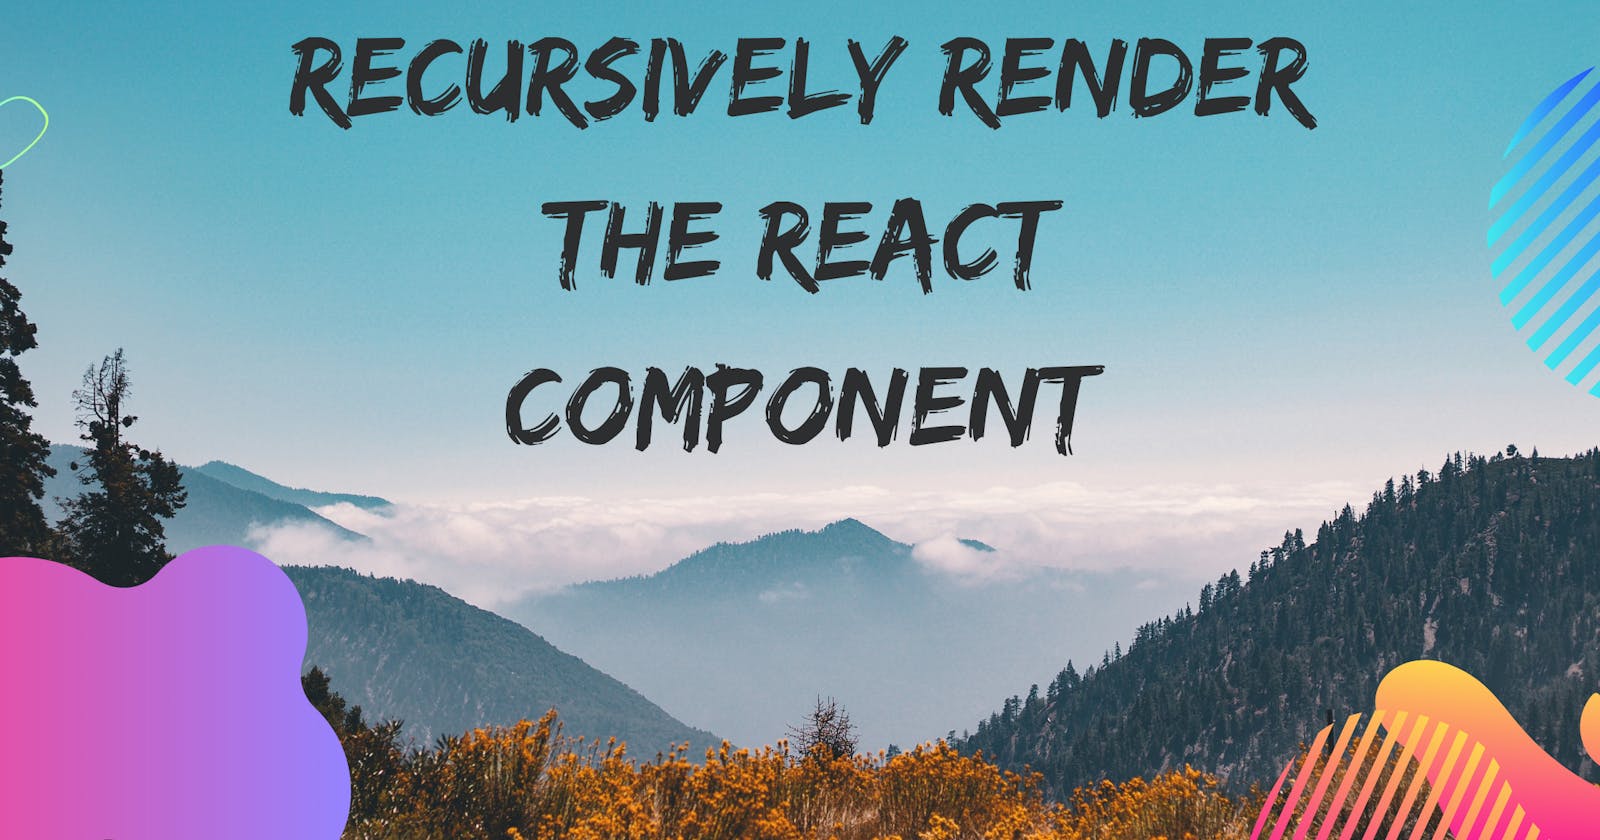 How to Recursively Render the React Component